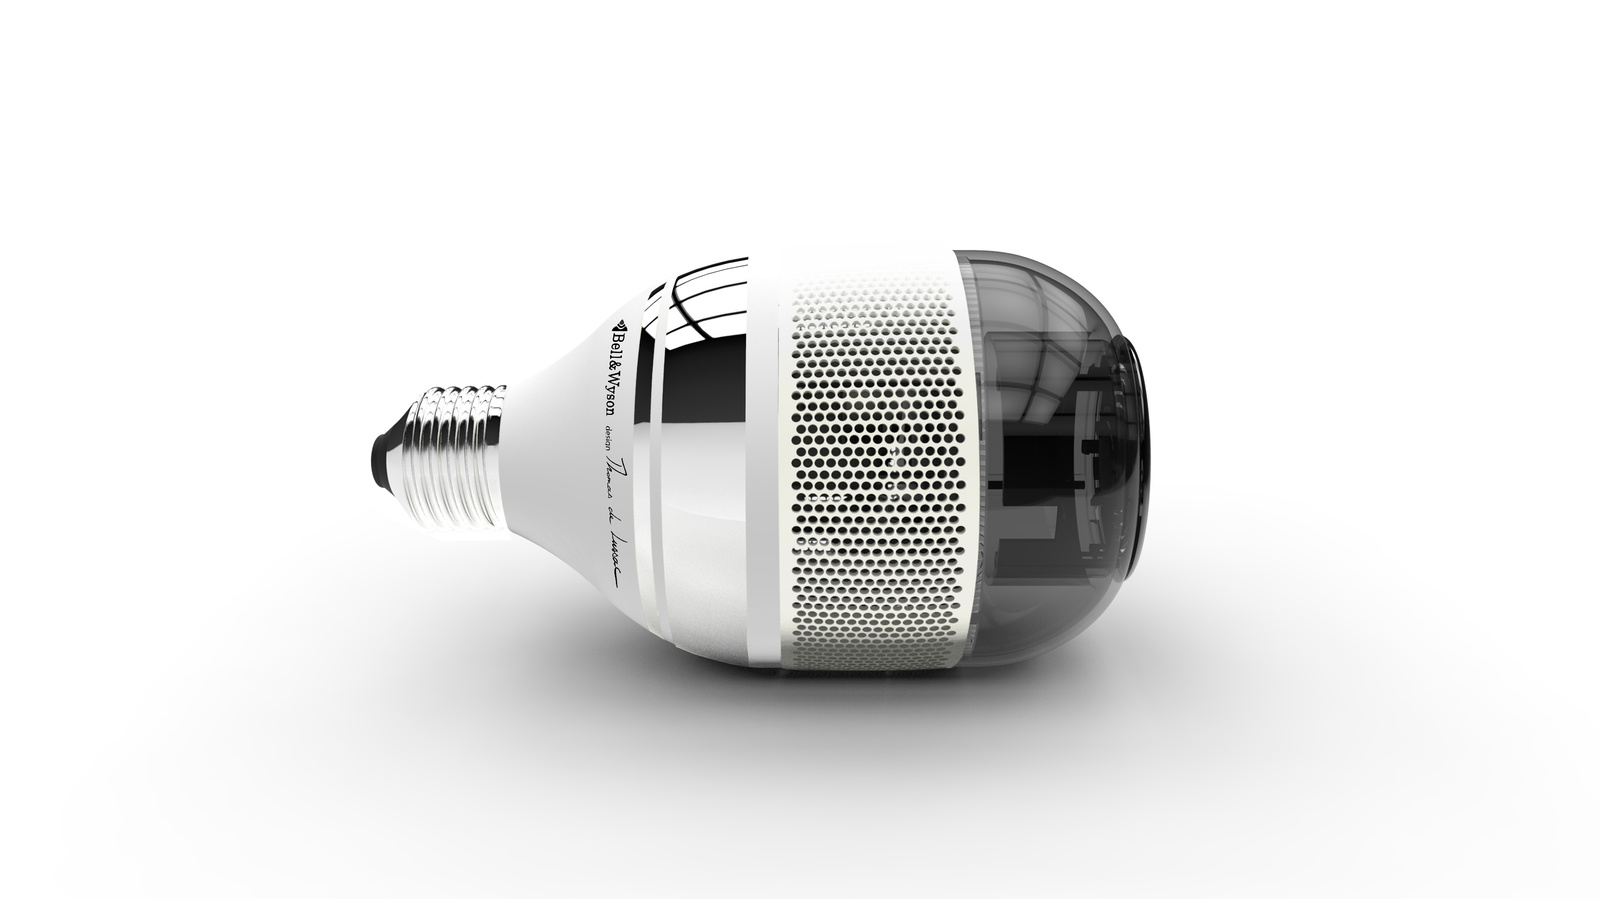 hybrid lamp with speakers include